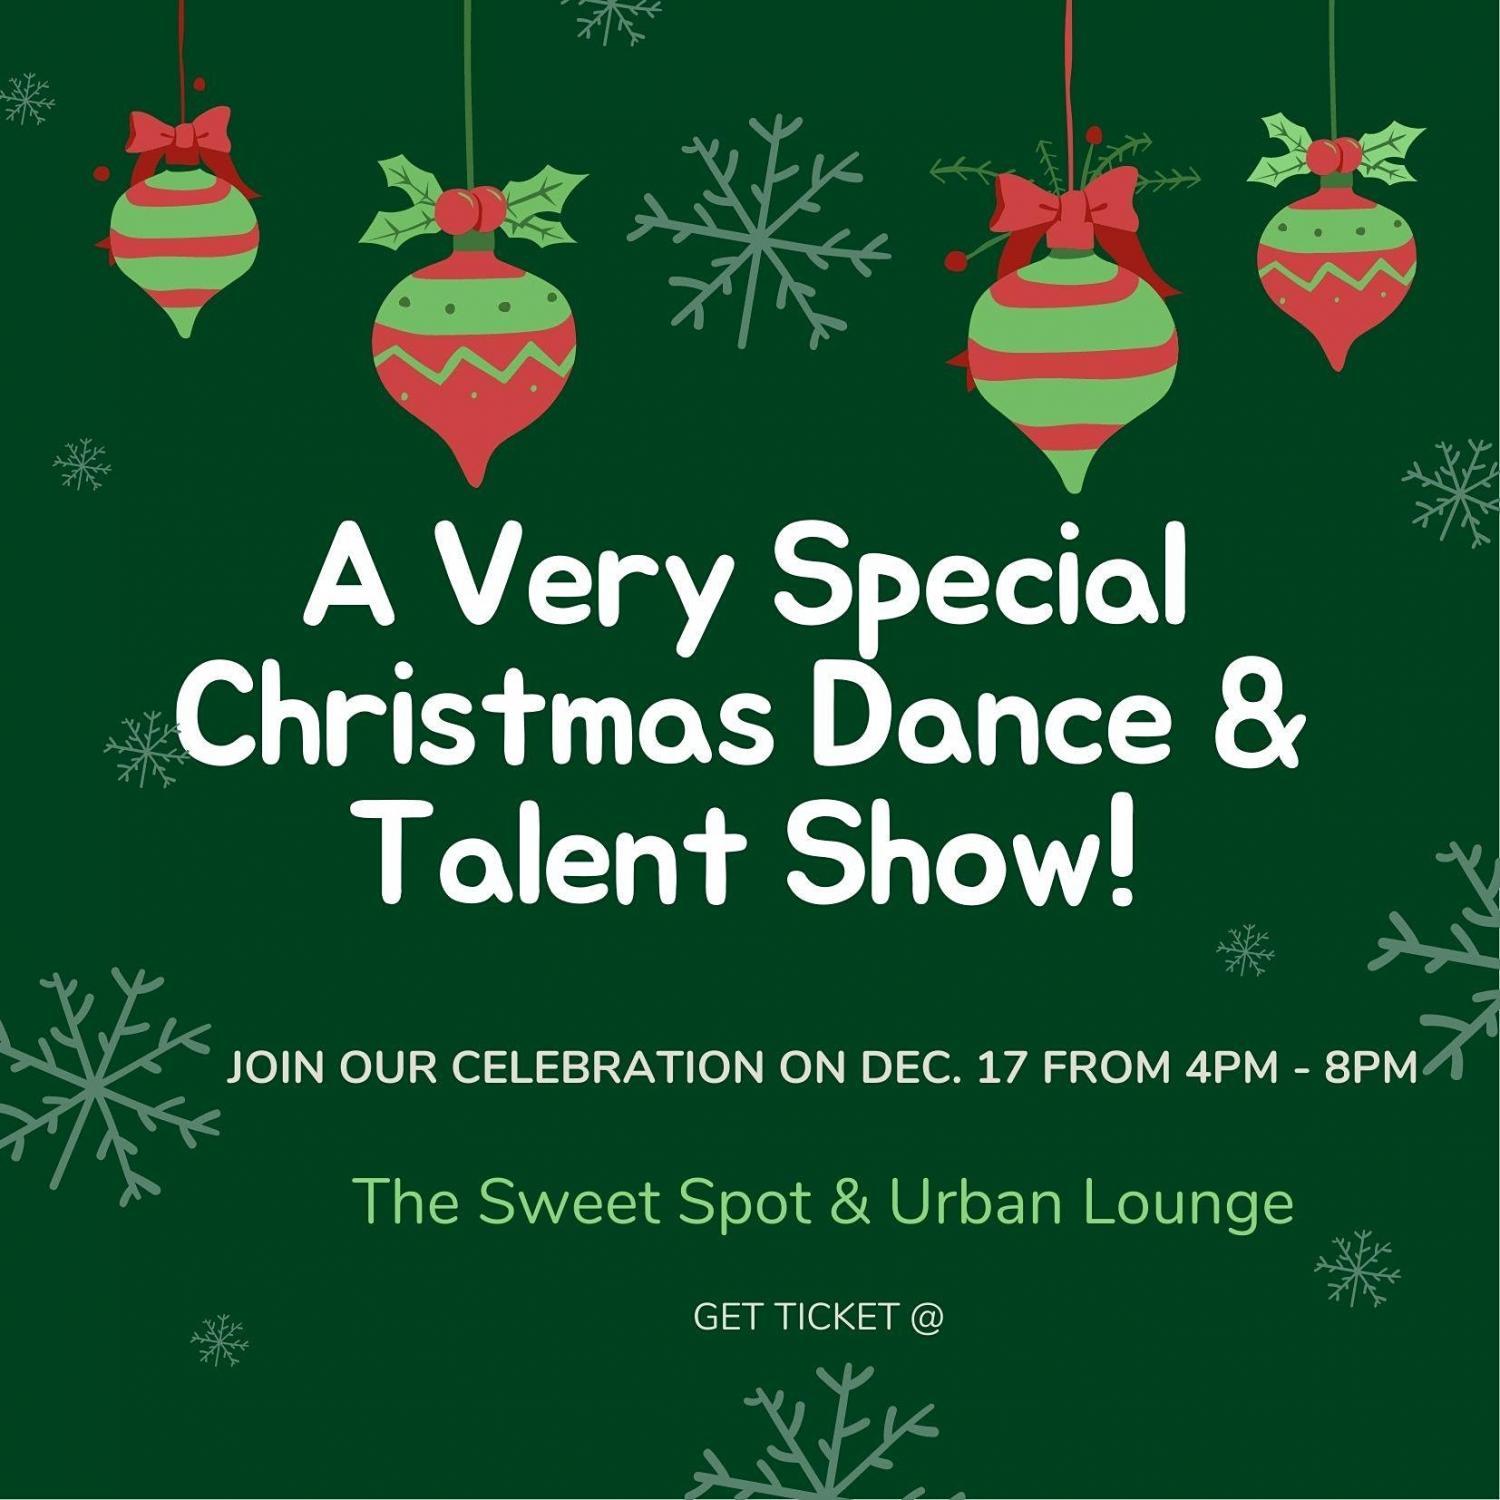 A Very Special Christmas Dance & Talent Show at Jacksonville